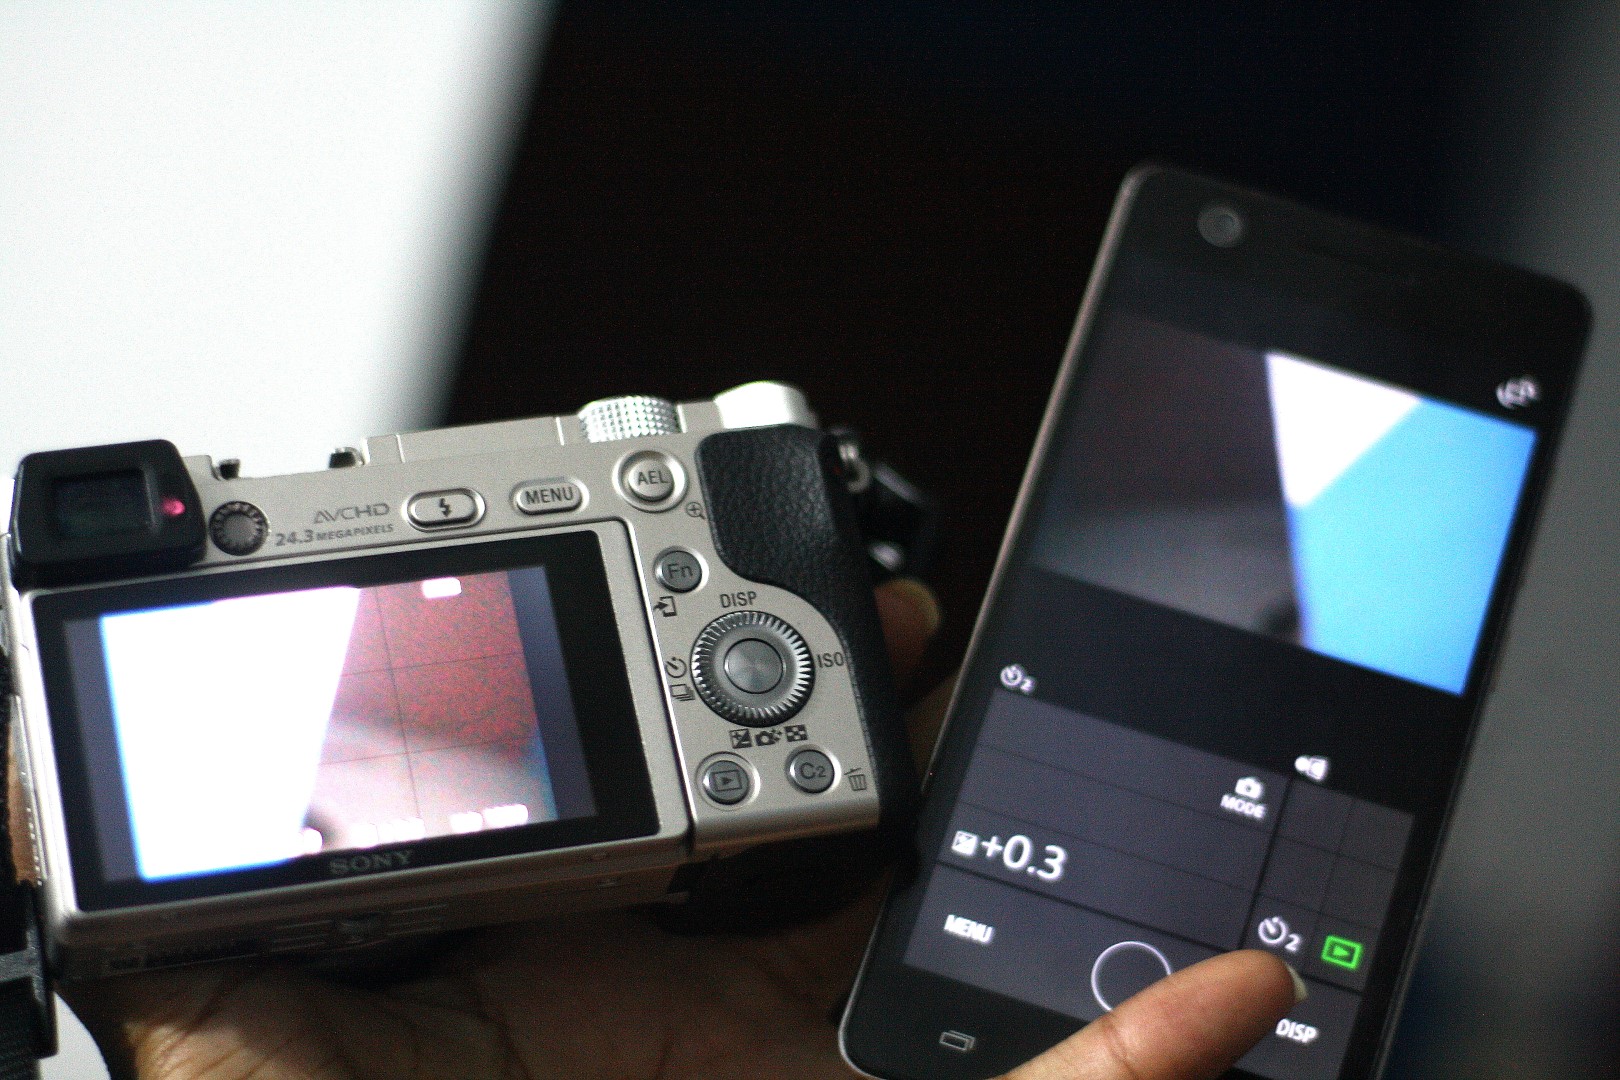 Picture showing the Sony A6000 and an infinix hot s connected together via Wifi